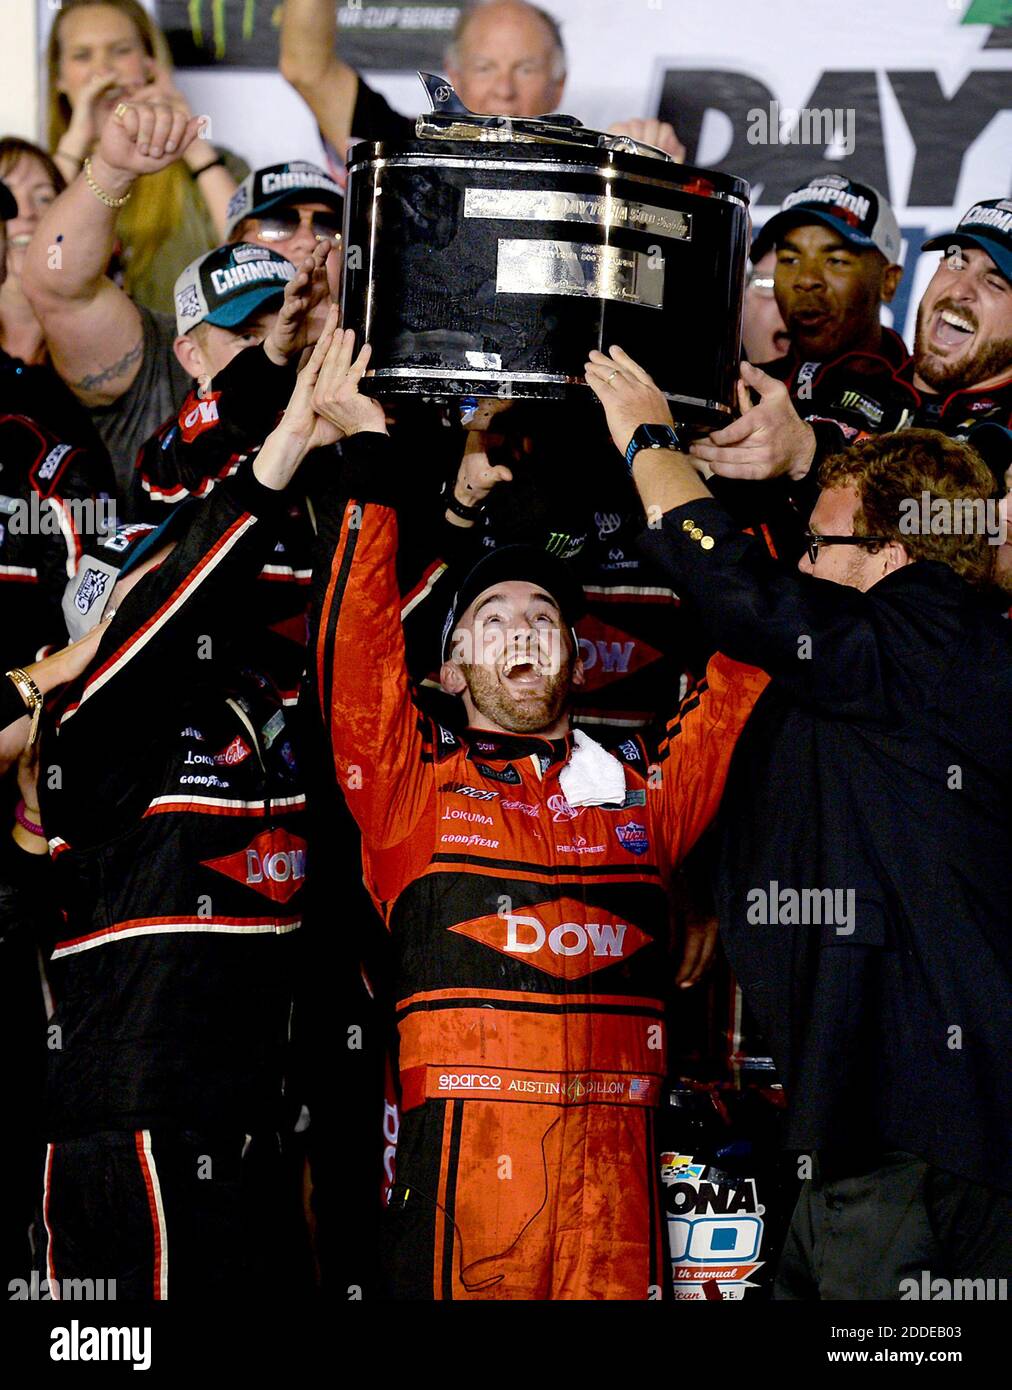 NO FILM, NO VIDEO, NO TV, NO DOCUMENTARY - NASCAR driver Austin Dillon and his team celebrate their victory in the 60th Daytona 500 race on Sunday, February 18, 2018 at Daytona International Speedway in Daytona Beach, FL, USA. Driver Bubba Wallace finished second, with Denny Hamlin in third. Photo by Jeff Siner/Charlotte Observer/TNS/ABACAPRESS.COM Stock Photo